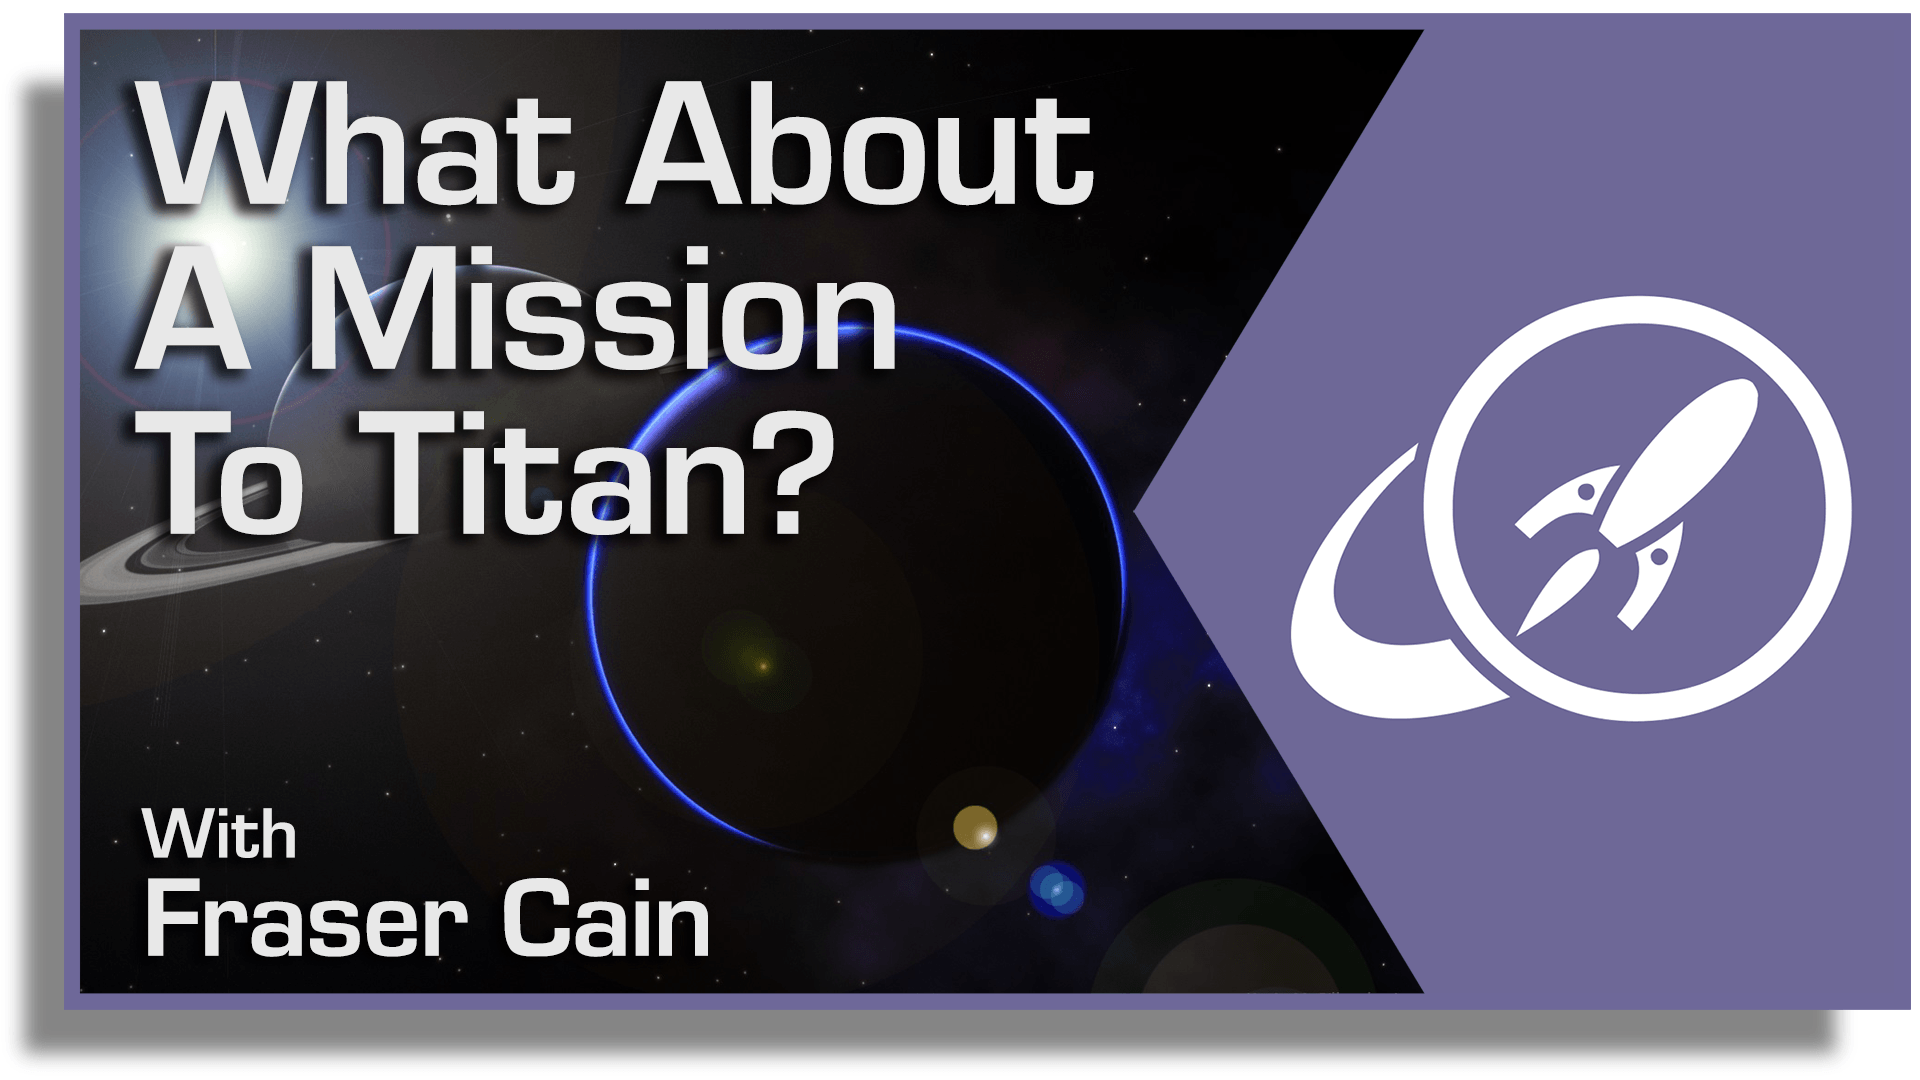 What About a Mission to Titan?